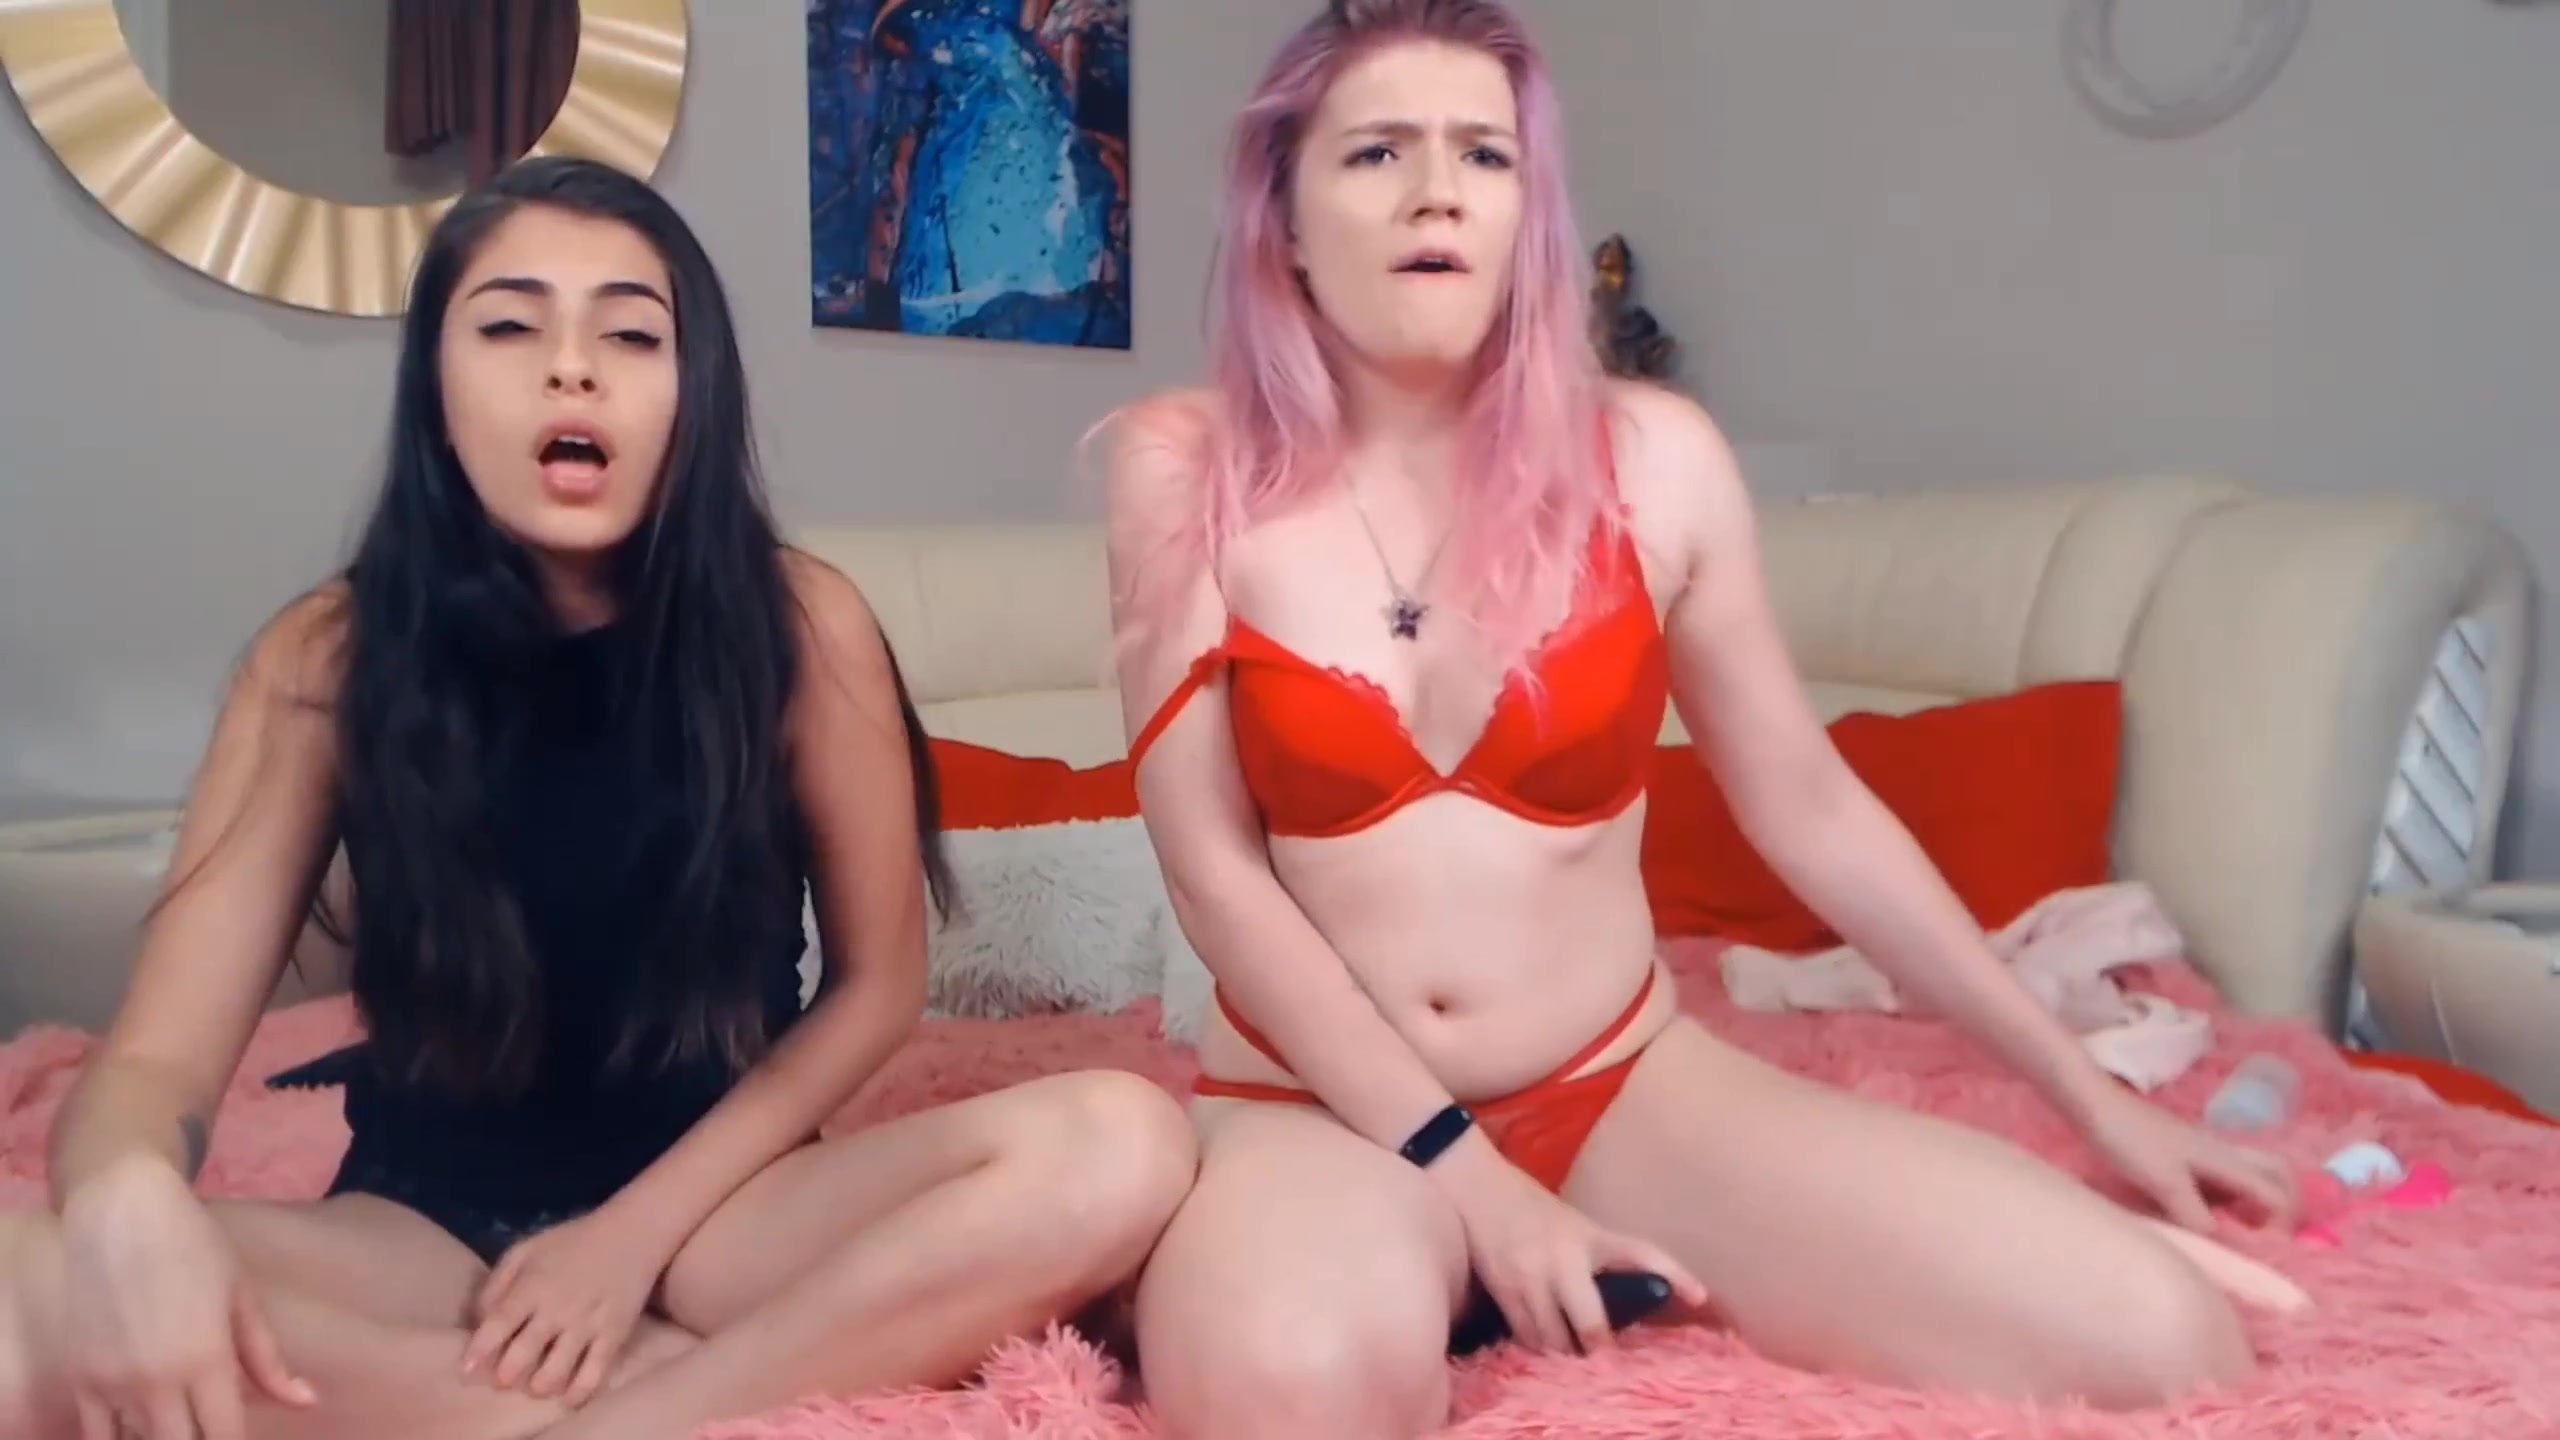 Kate_spice and friend body tease